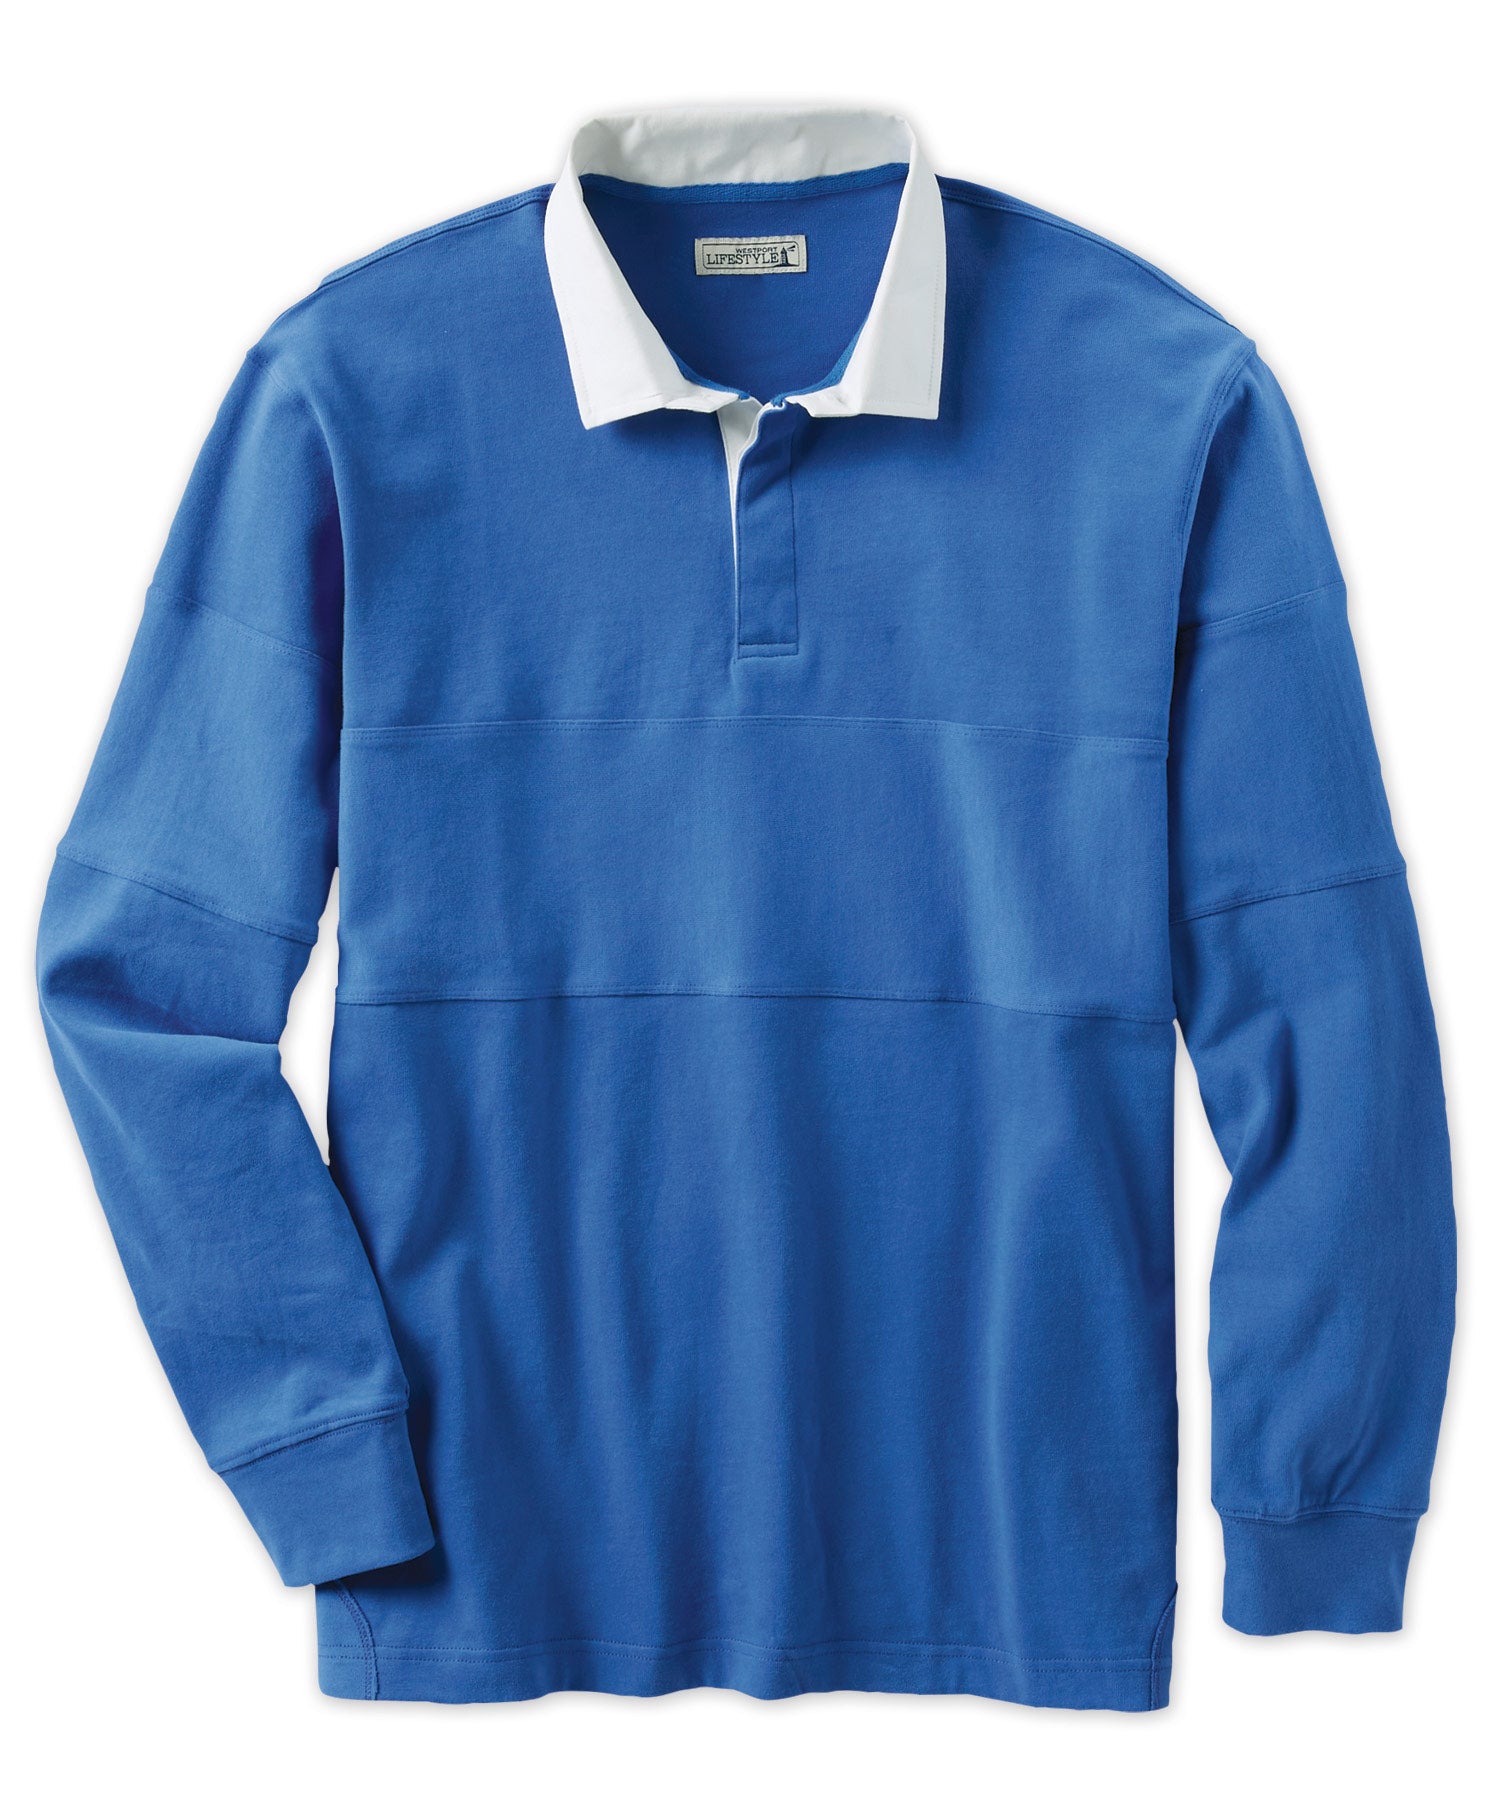 Westport Lifestyle Solid Performance Rugby Shirt, Men's Big & Tall